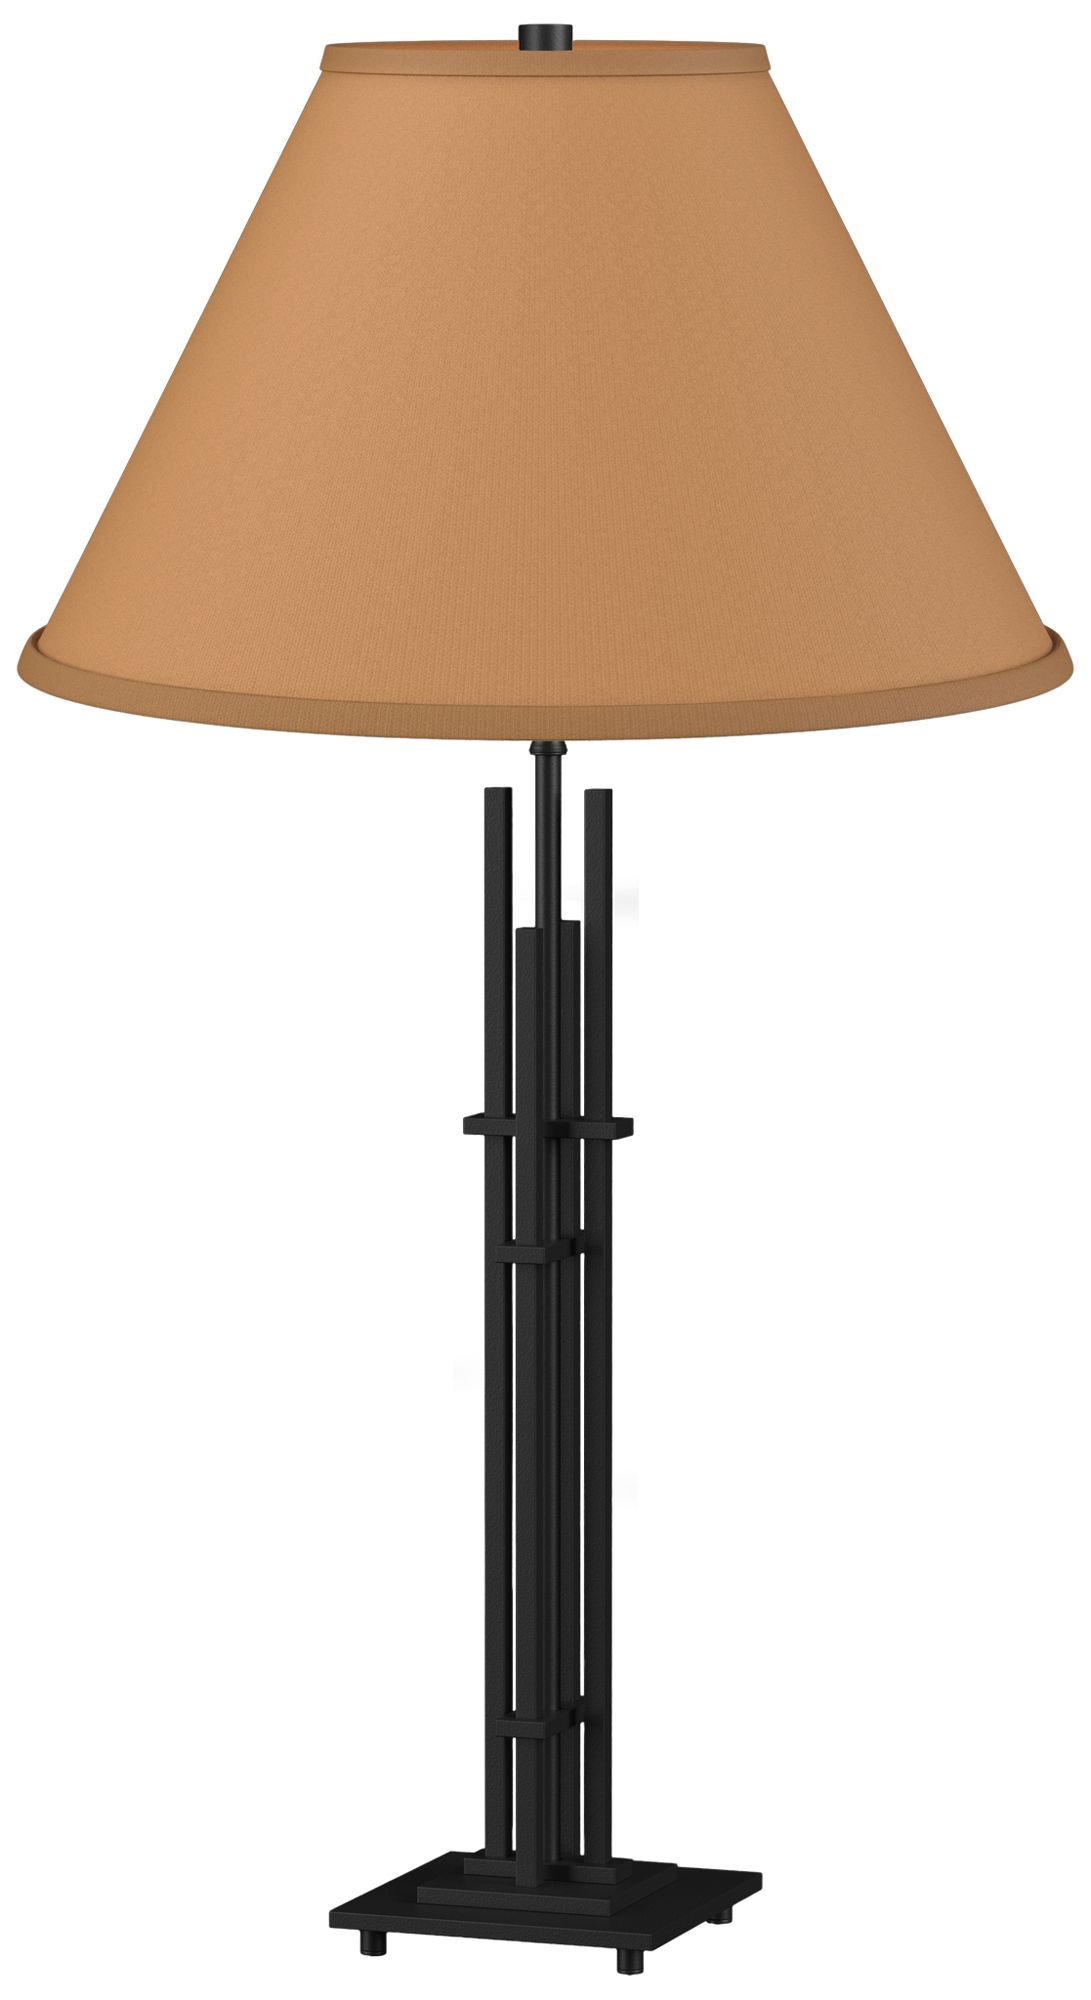 Metra 26" High Black Quad Table Lamp With Doeskin Suede Shade